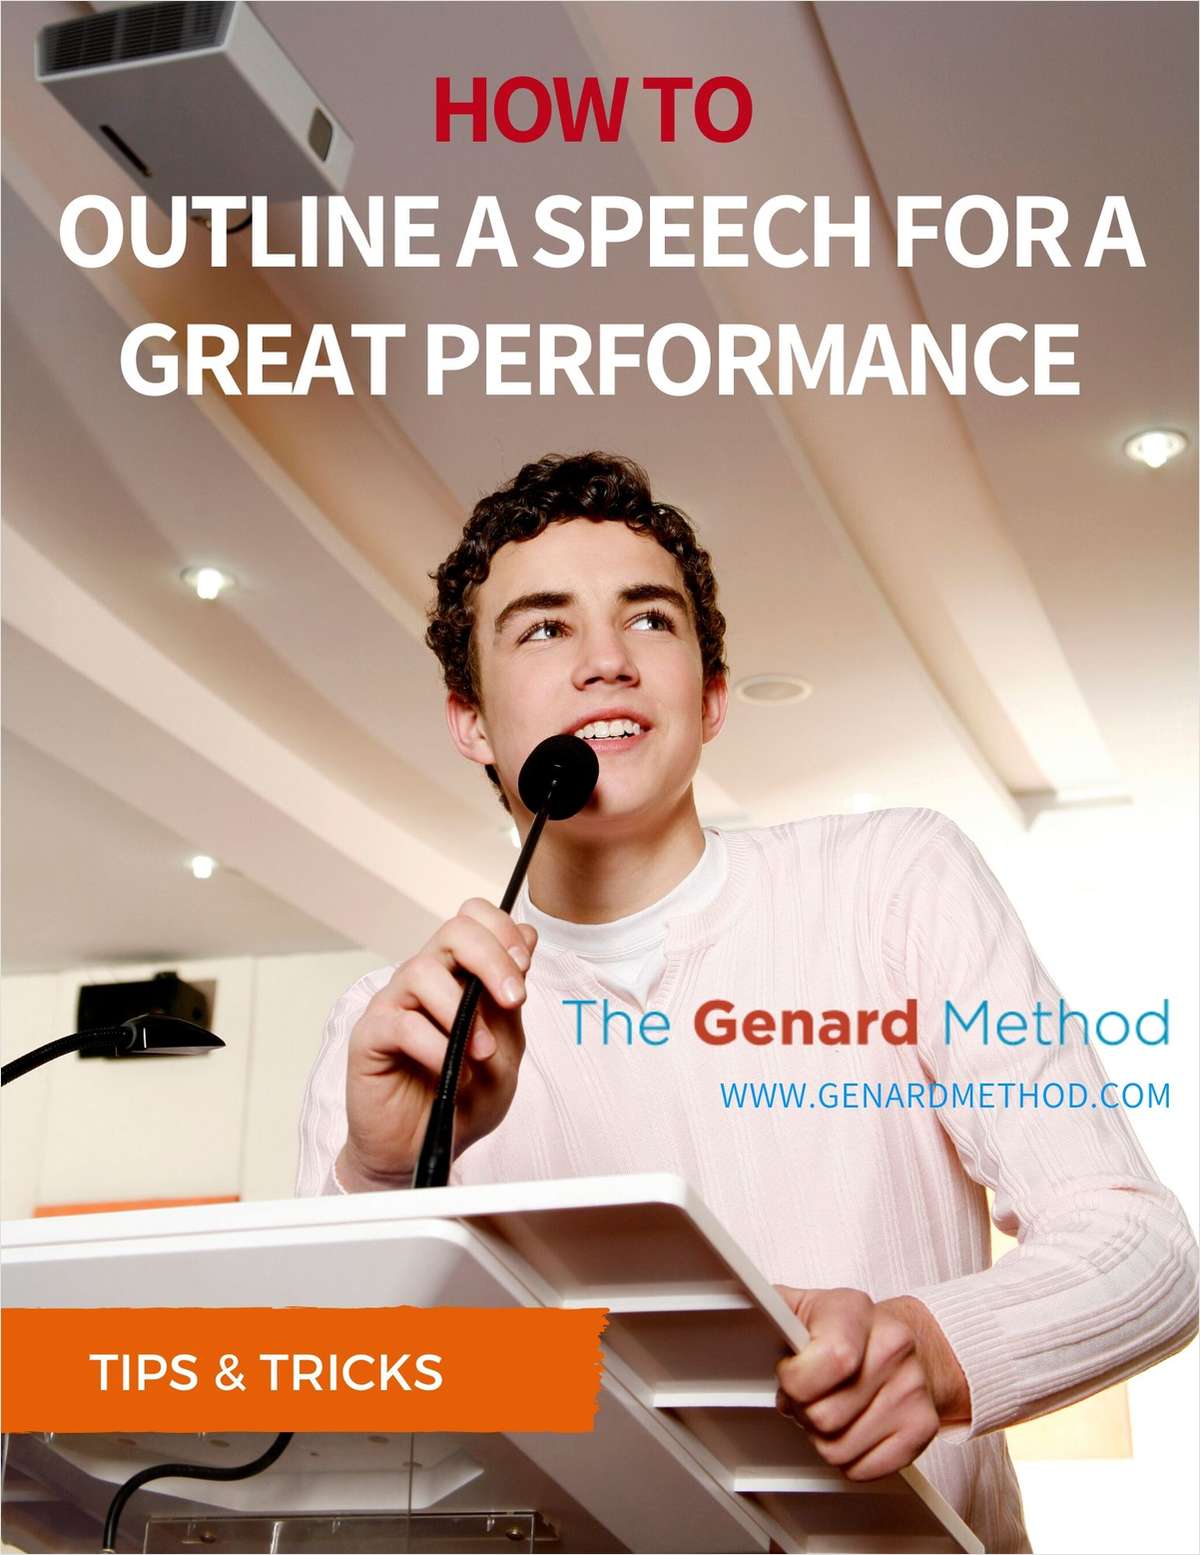 How to Outline a Speech for a Great Performance